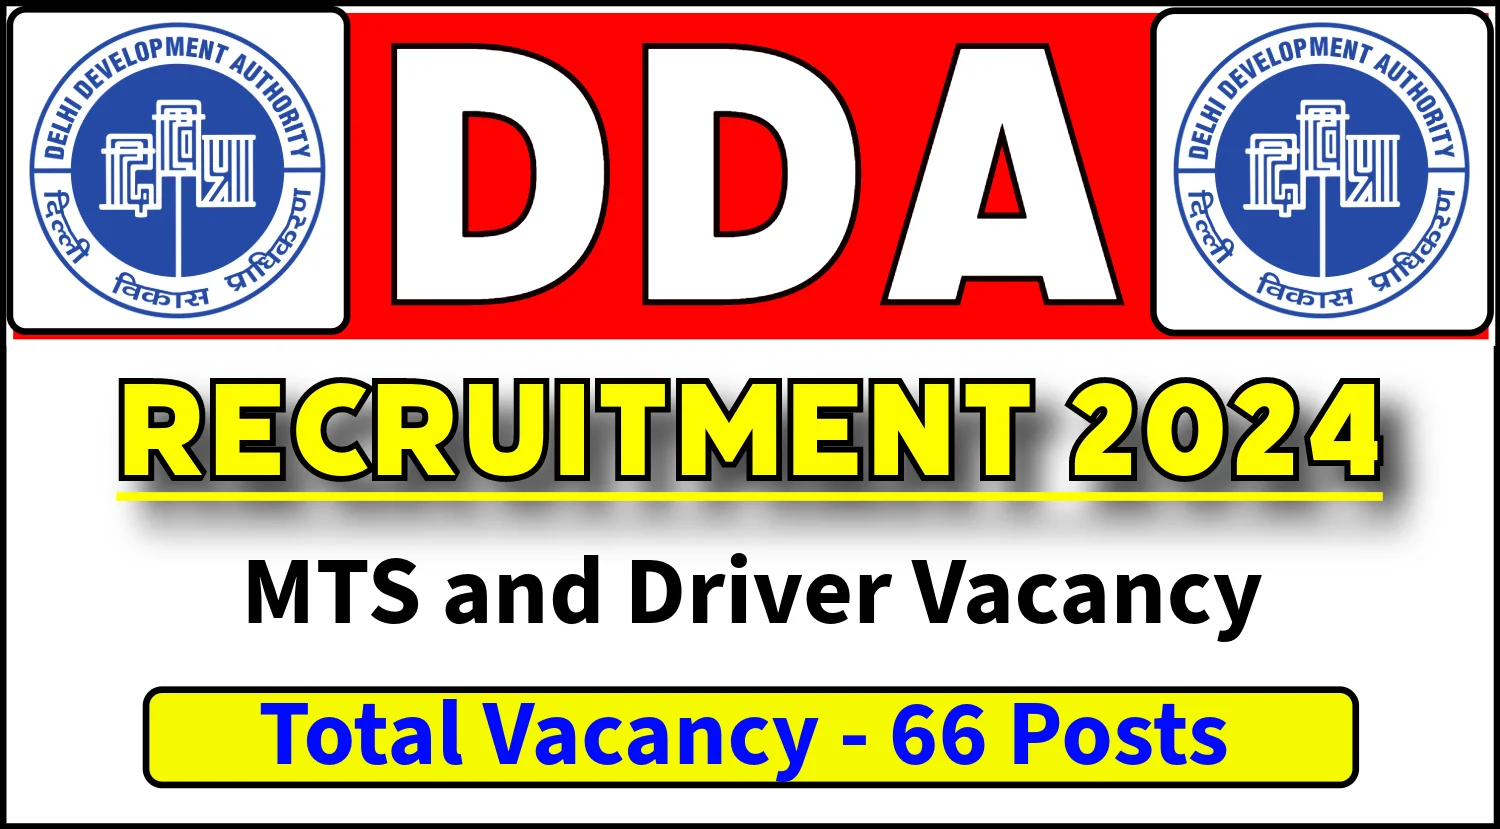 DDA MTS and Driver Recruitment 2024 for 66 Posts